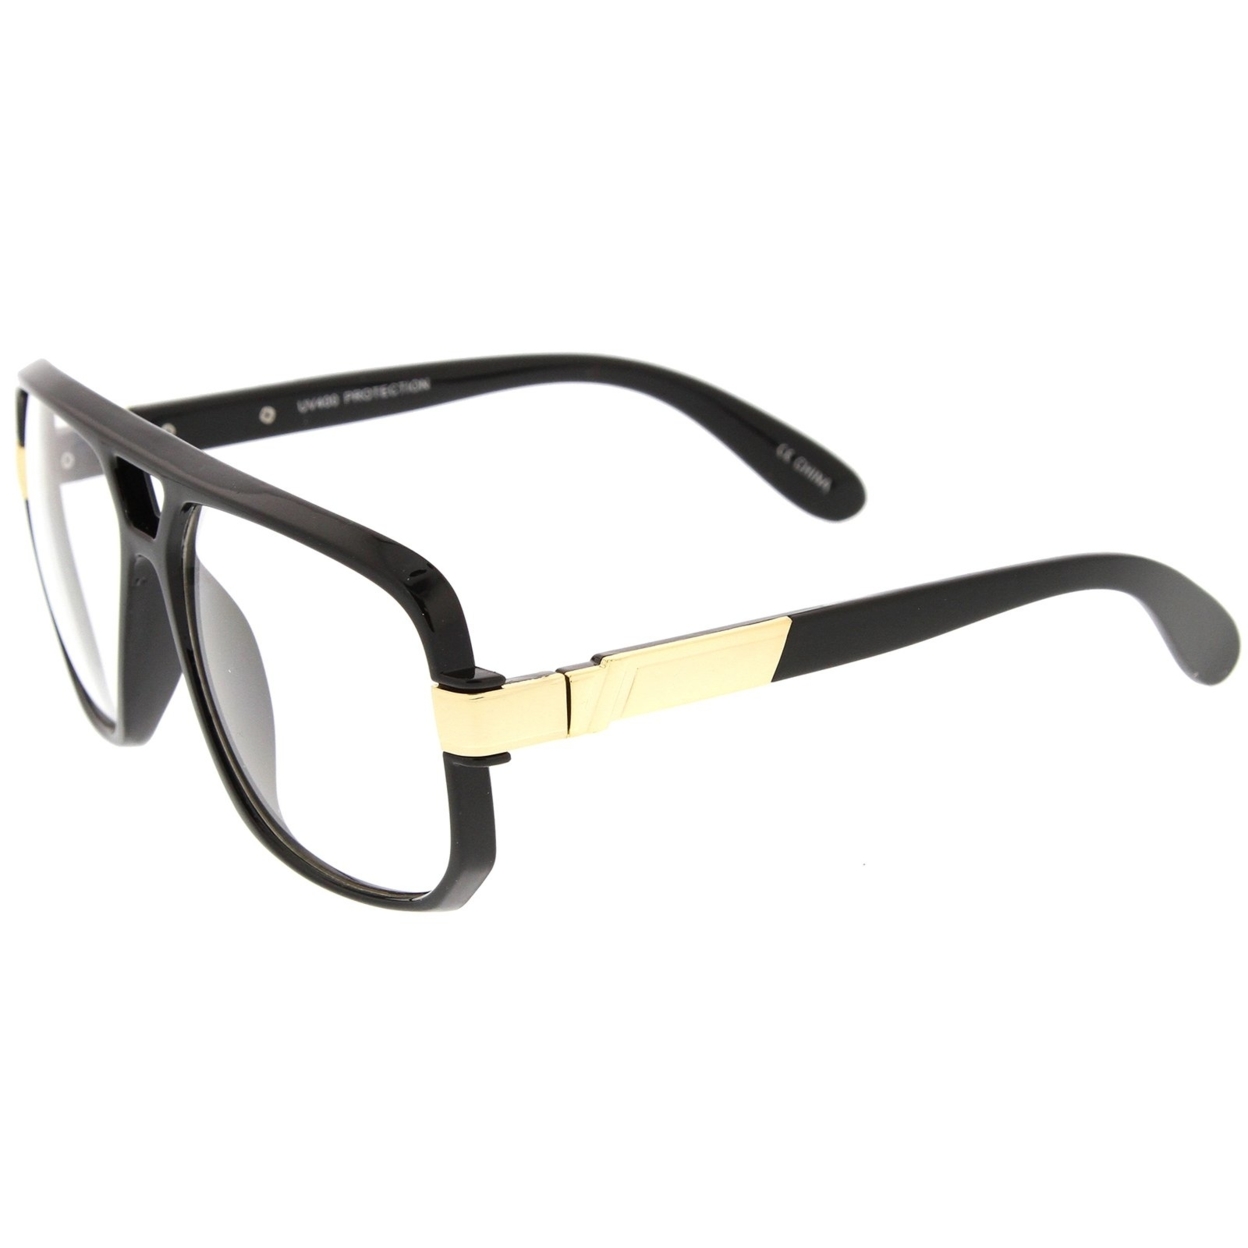 Classic Flat Top Metal Accented Temples Clear Lens Square Aviator Glasses 56mm - White-Gold / Clear